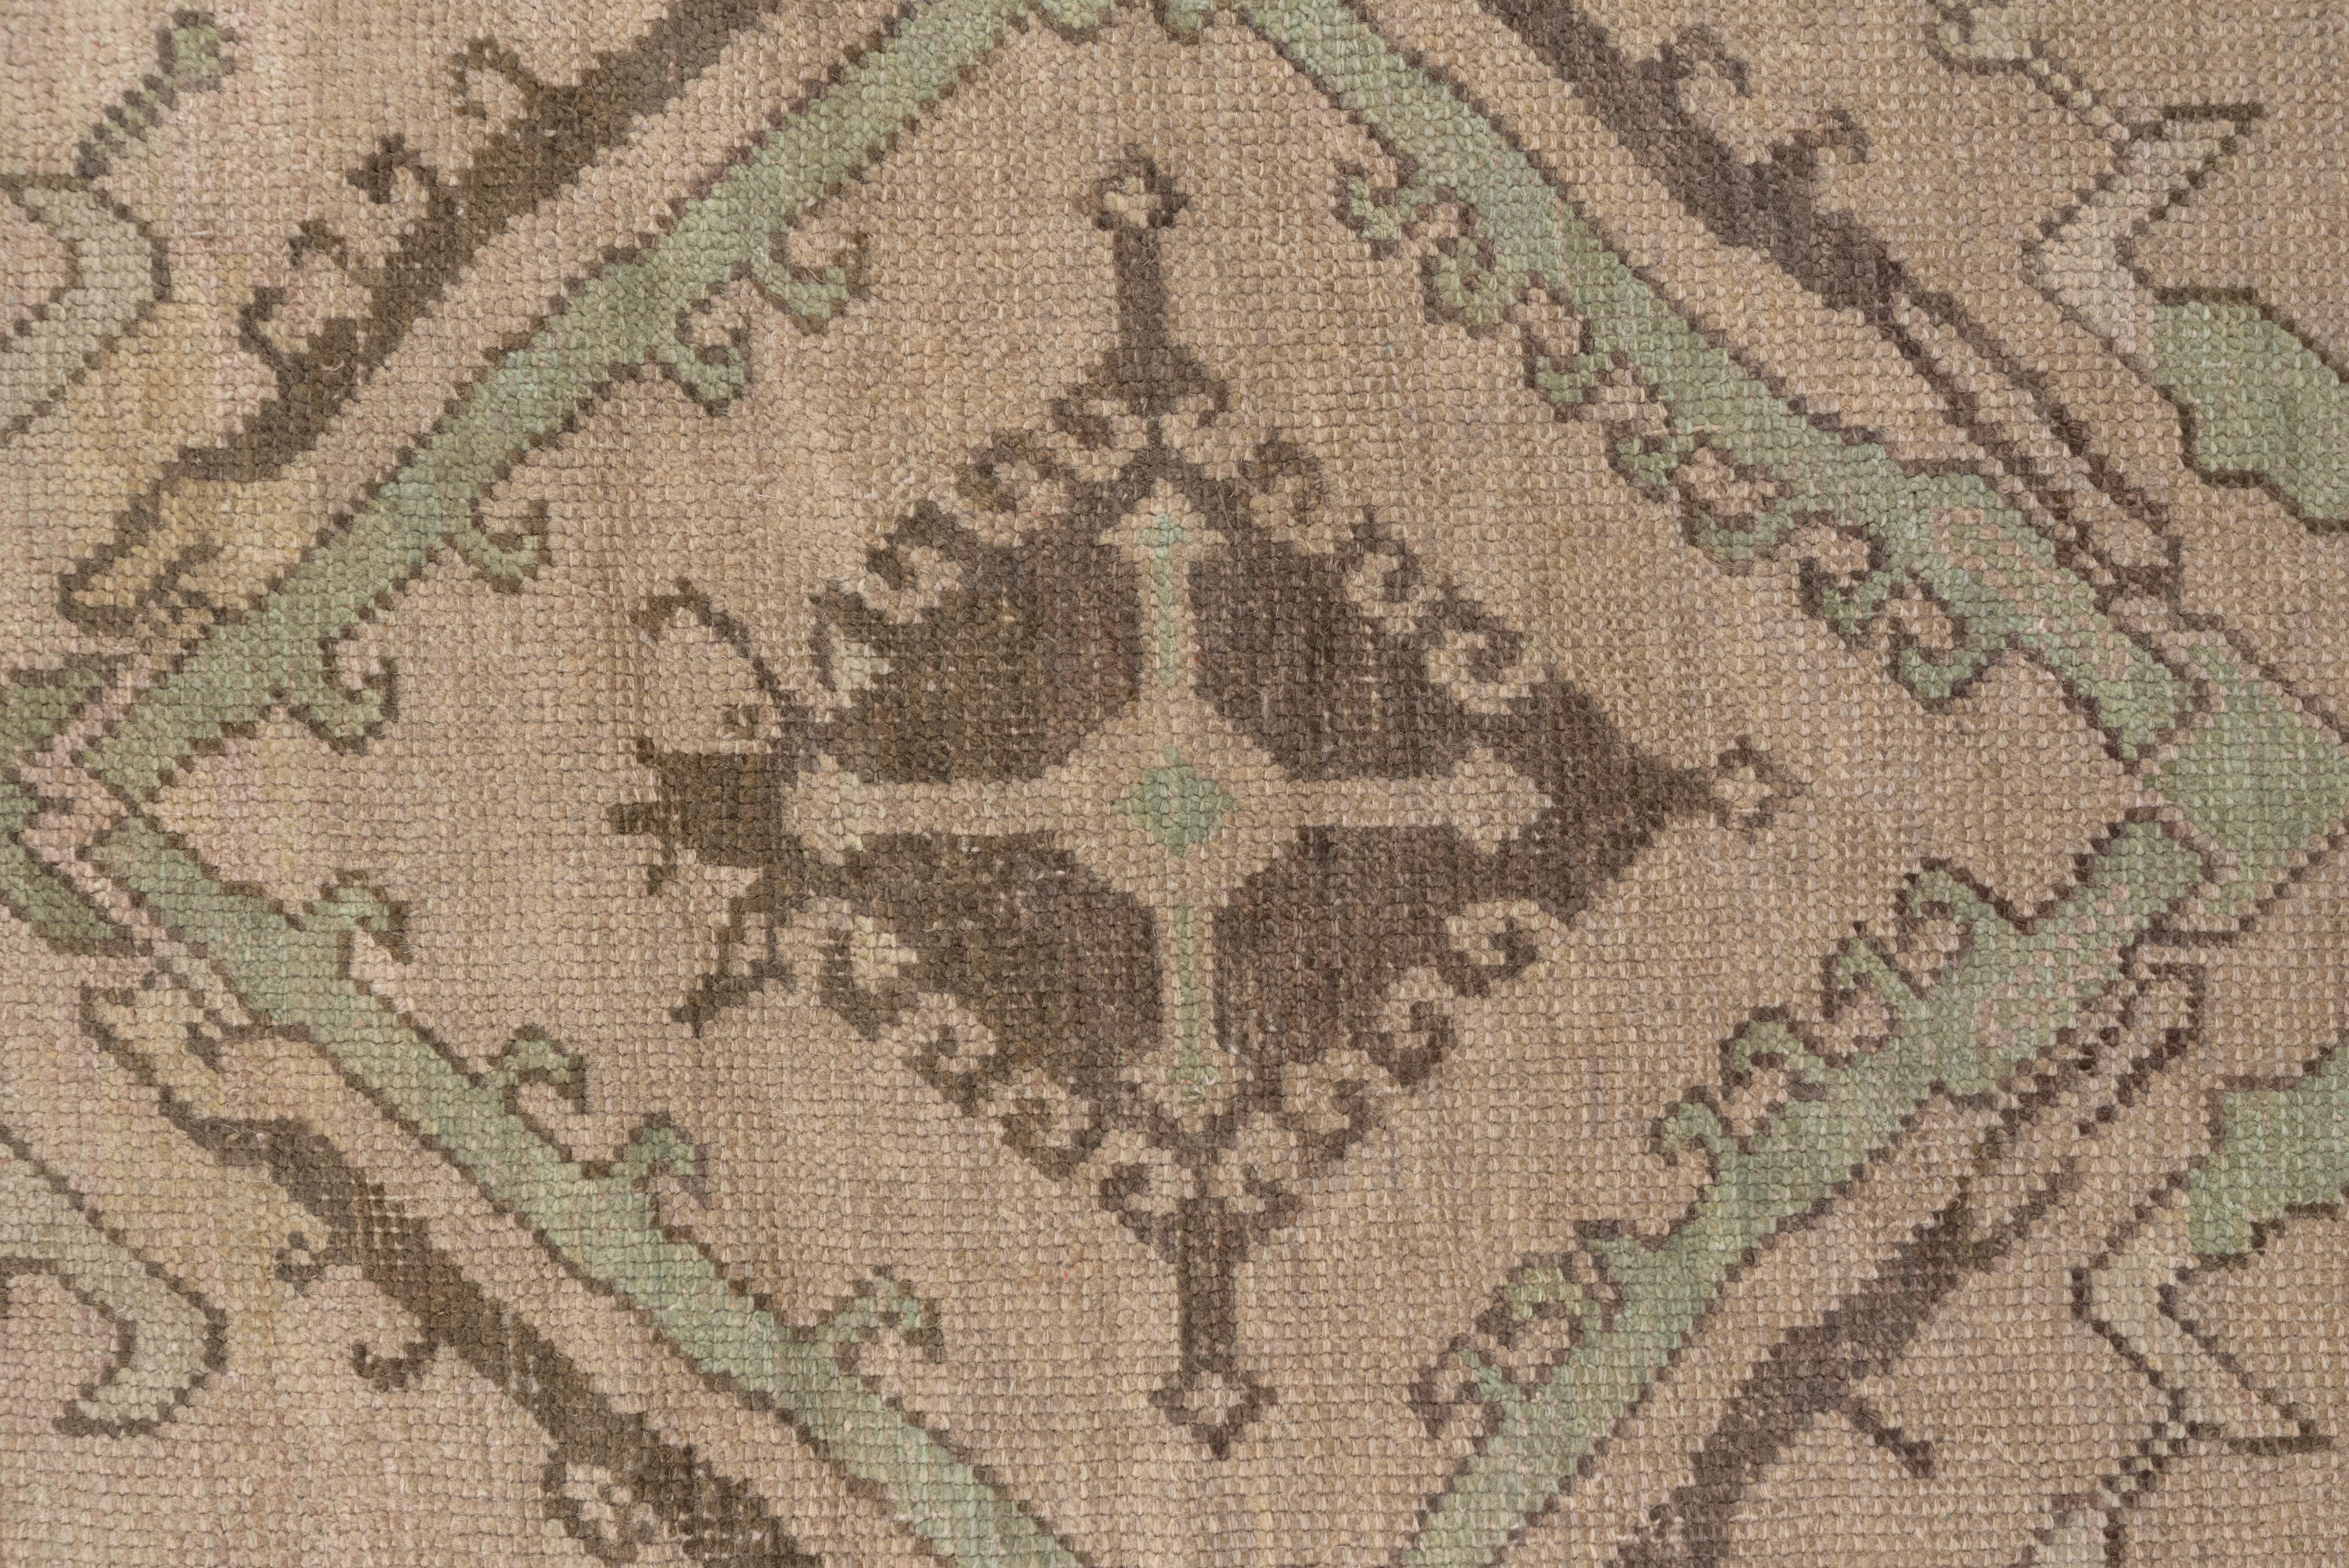 Early 20th Century Large Antique Turkish Oushak Carpet with Earth Tones, Allover Field, circa 1920s